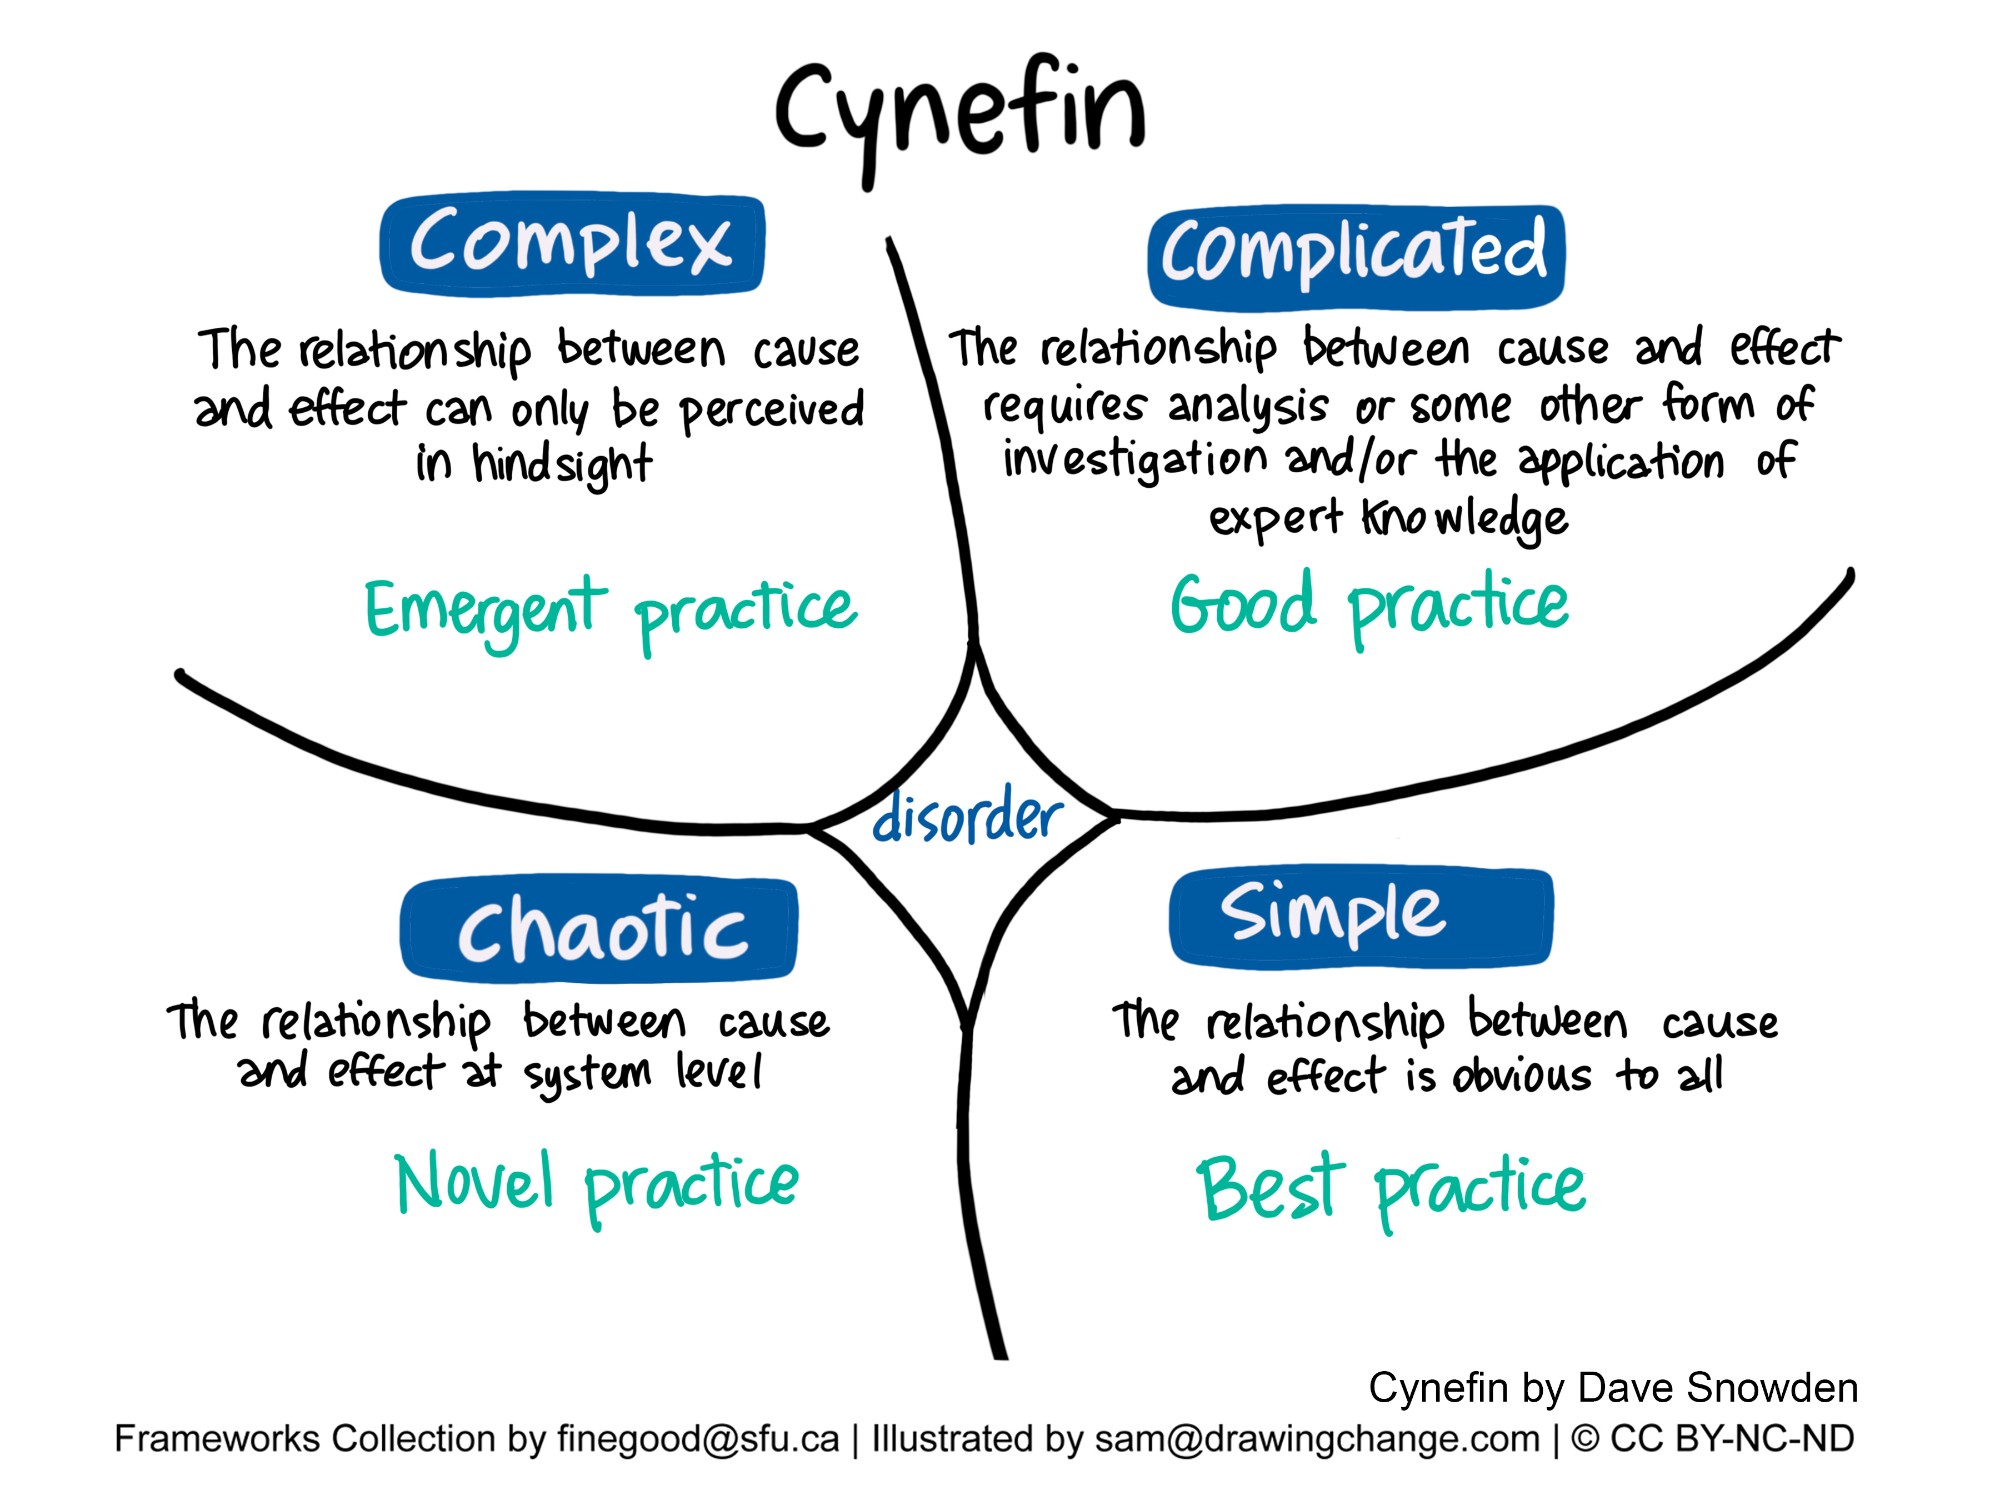 The image is a graphical representation of the Cynefin framework, a conceptual framework used for decision-making. It's structured into four domains, represented as contiguous areas with curved boundaries:  The "Simple" domain, in the bottom right, notes "The relationship between cause and effect is obvious to all" and is labeled "Best practice."  The "Complicated" domain, top right, says "The relationship between cause and effect requires analysis or some other form of investigation and/or the application of expert knowledge" and is marked with "Good practice."  The "Complex" domain top left states "The relationship between cause and effect can only be perceived in hindsight" and is tagged with "Emergent practice."  The "Chaotic" domain, at the bottom left, reads "The relationship between cause and effect at system level" with the notation "Novel practice."   At the center, where the domains meet, there's a black, irregular shape labeled "disorder."  The framework was developed by Dave Snowden, and the image includes attributions to the Frameworks Collection by finegood@sfu.ca and illustrations by sam@drawingchange.com, along with a CC BY-NC-ND Creative Commons license notice.